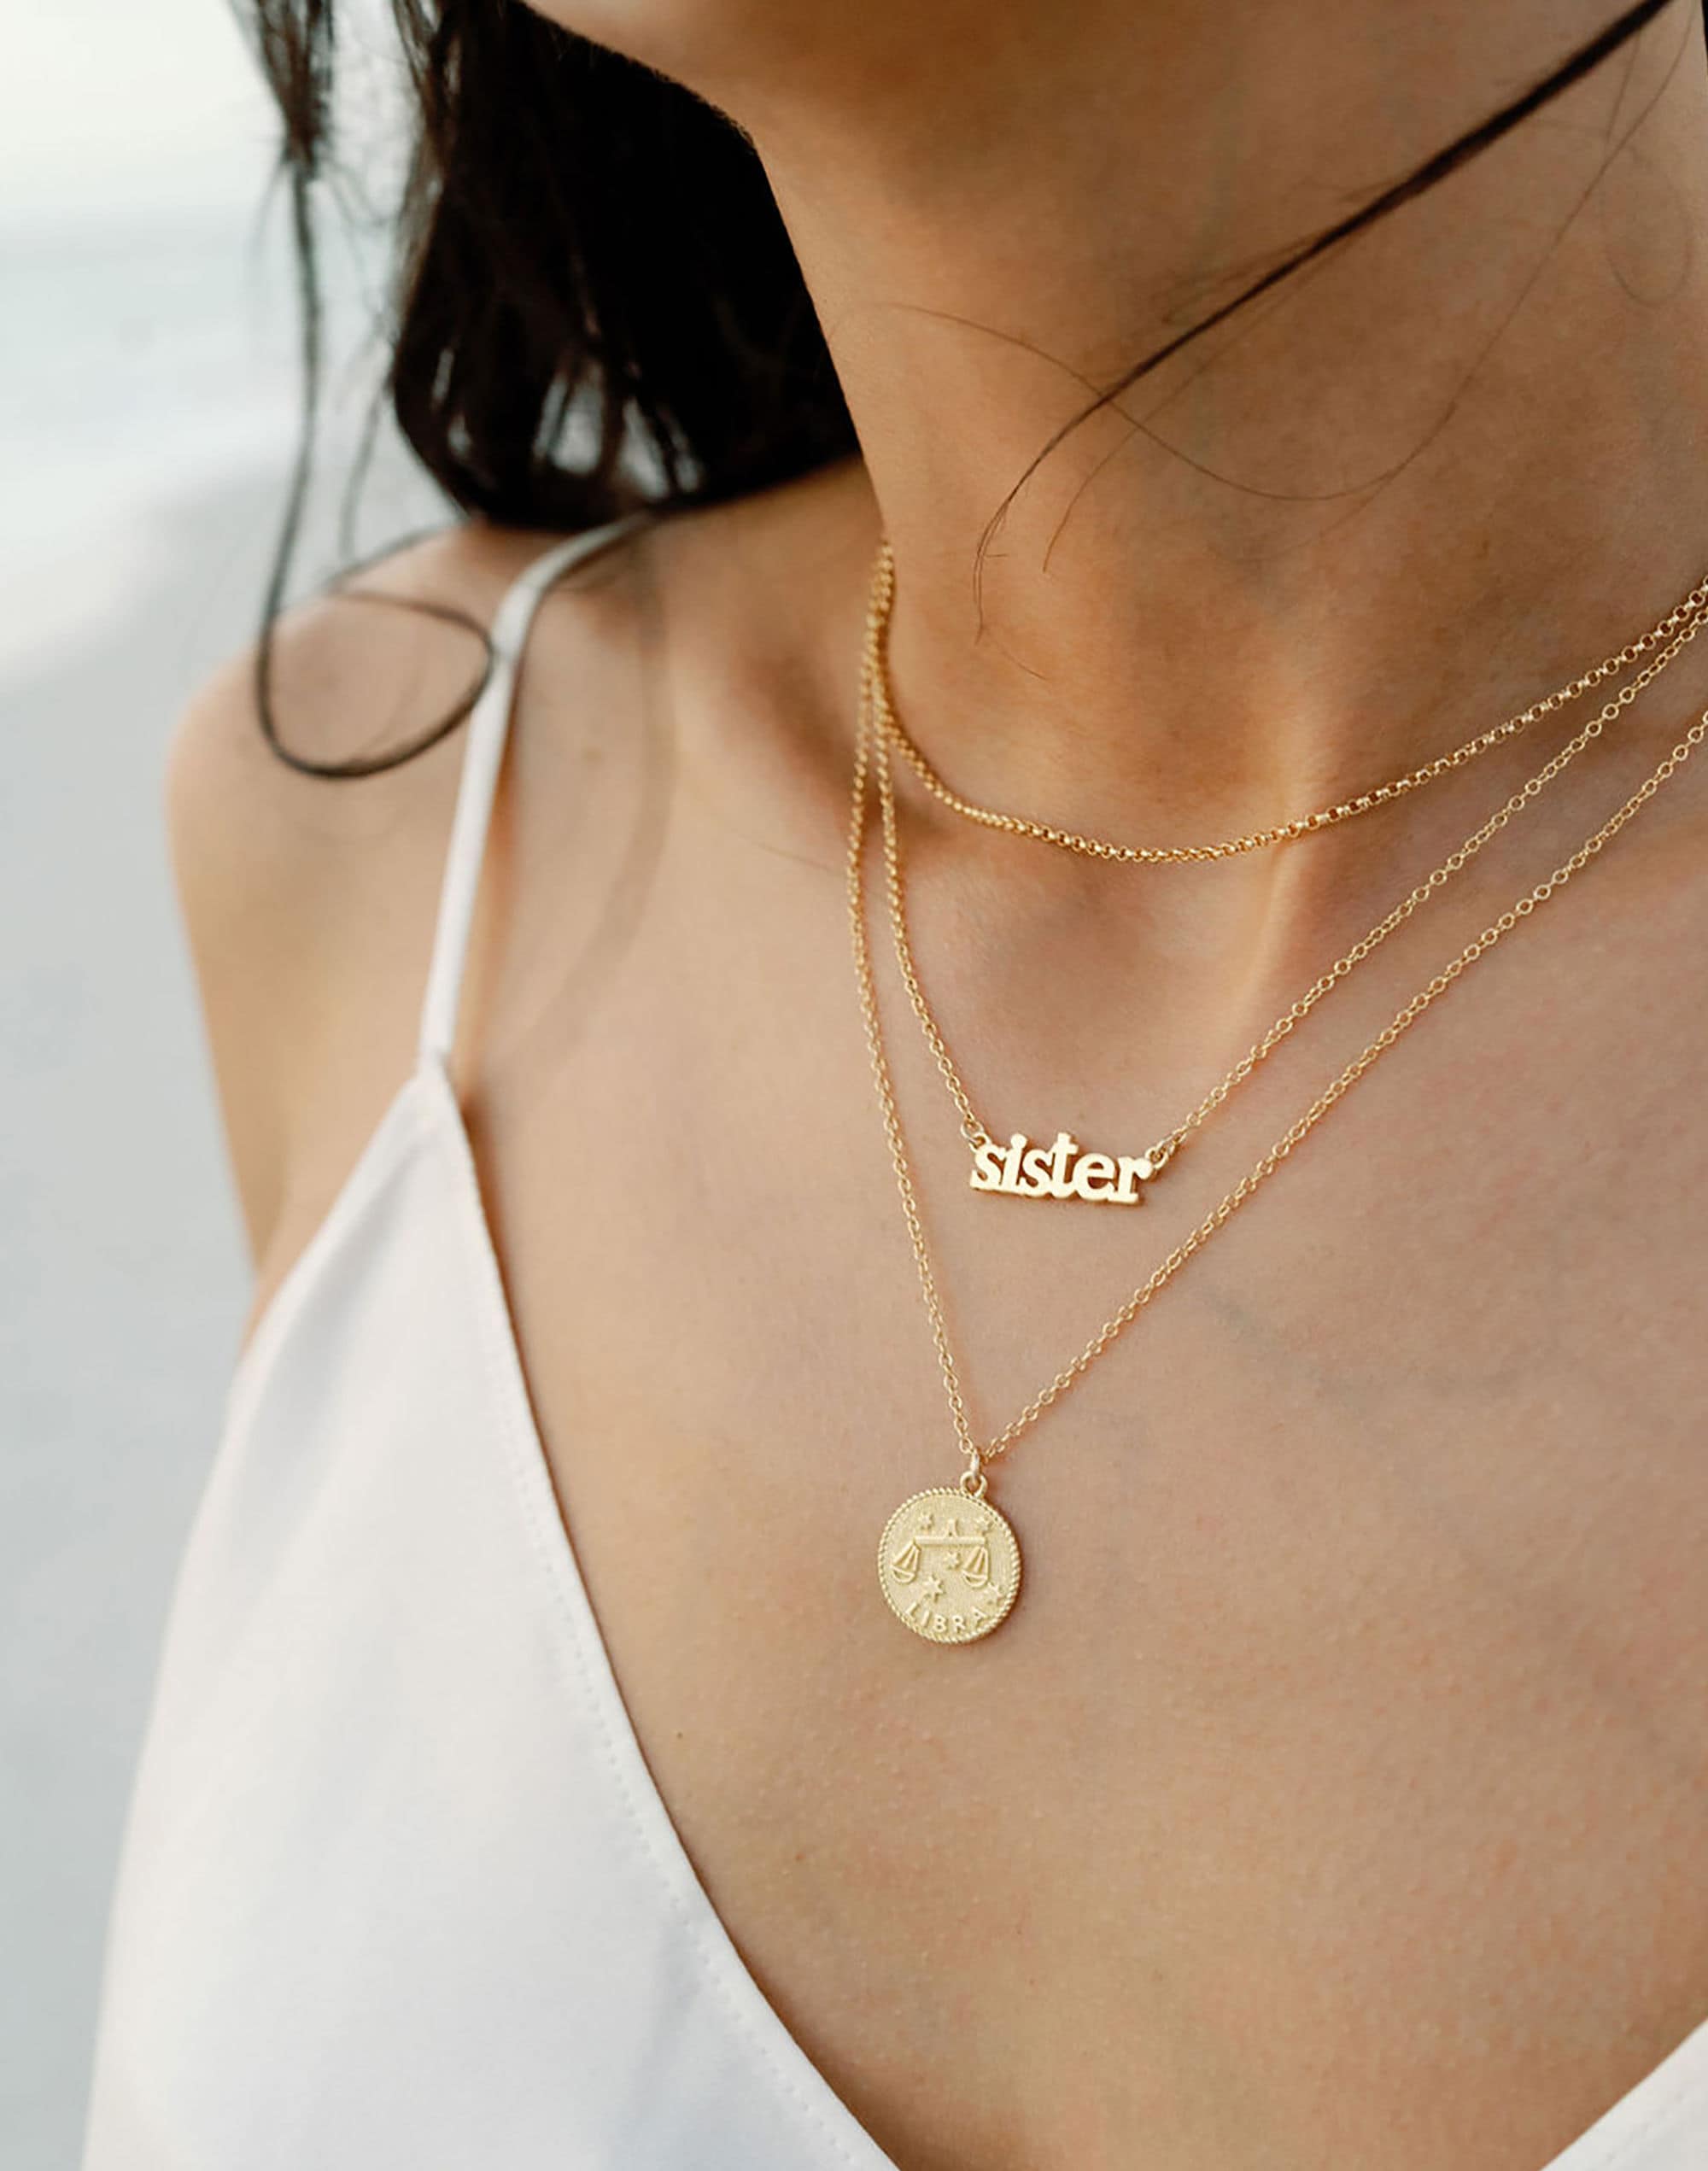 Katie Dean Jewelry™ Sister Necklace